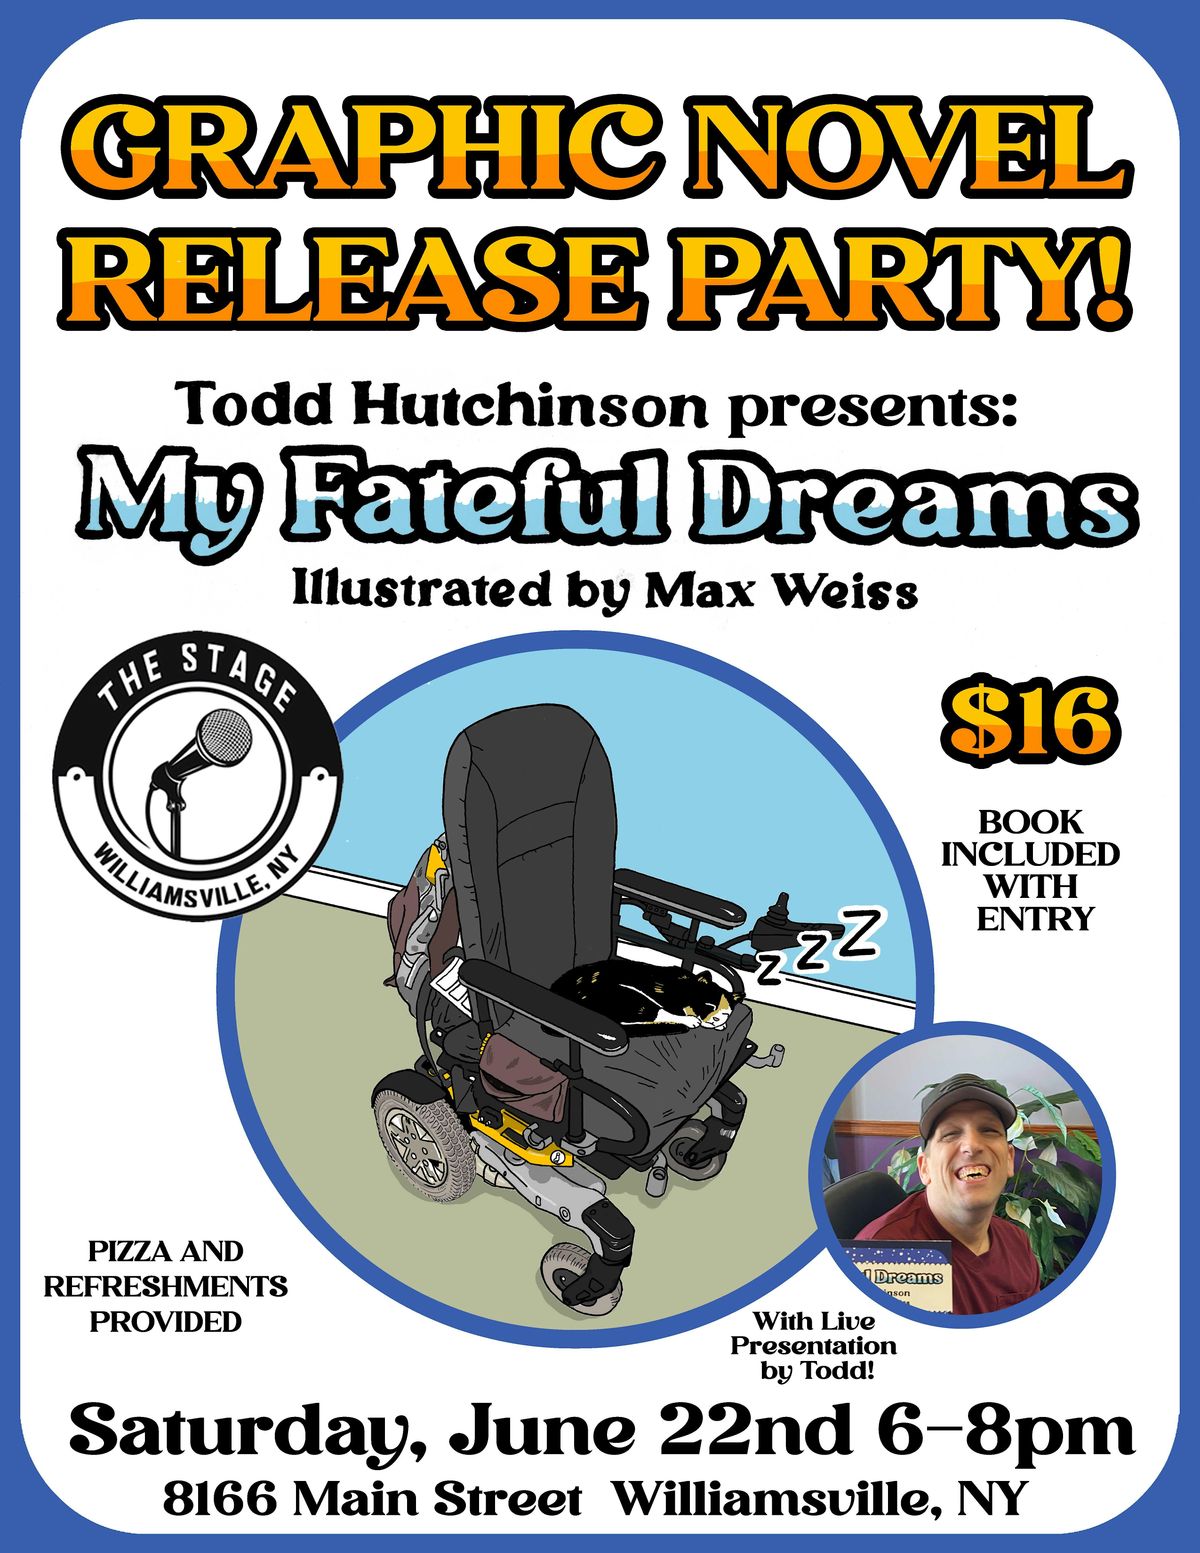 Todd Hutchinson's Graphic Novel Release Party